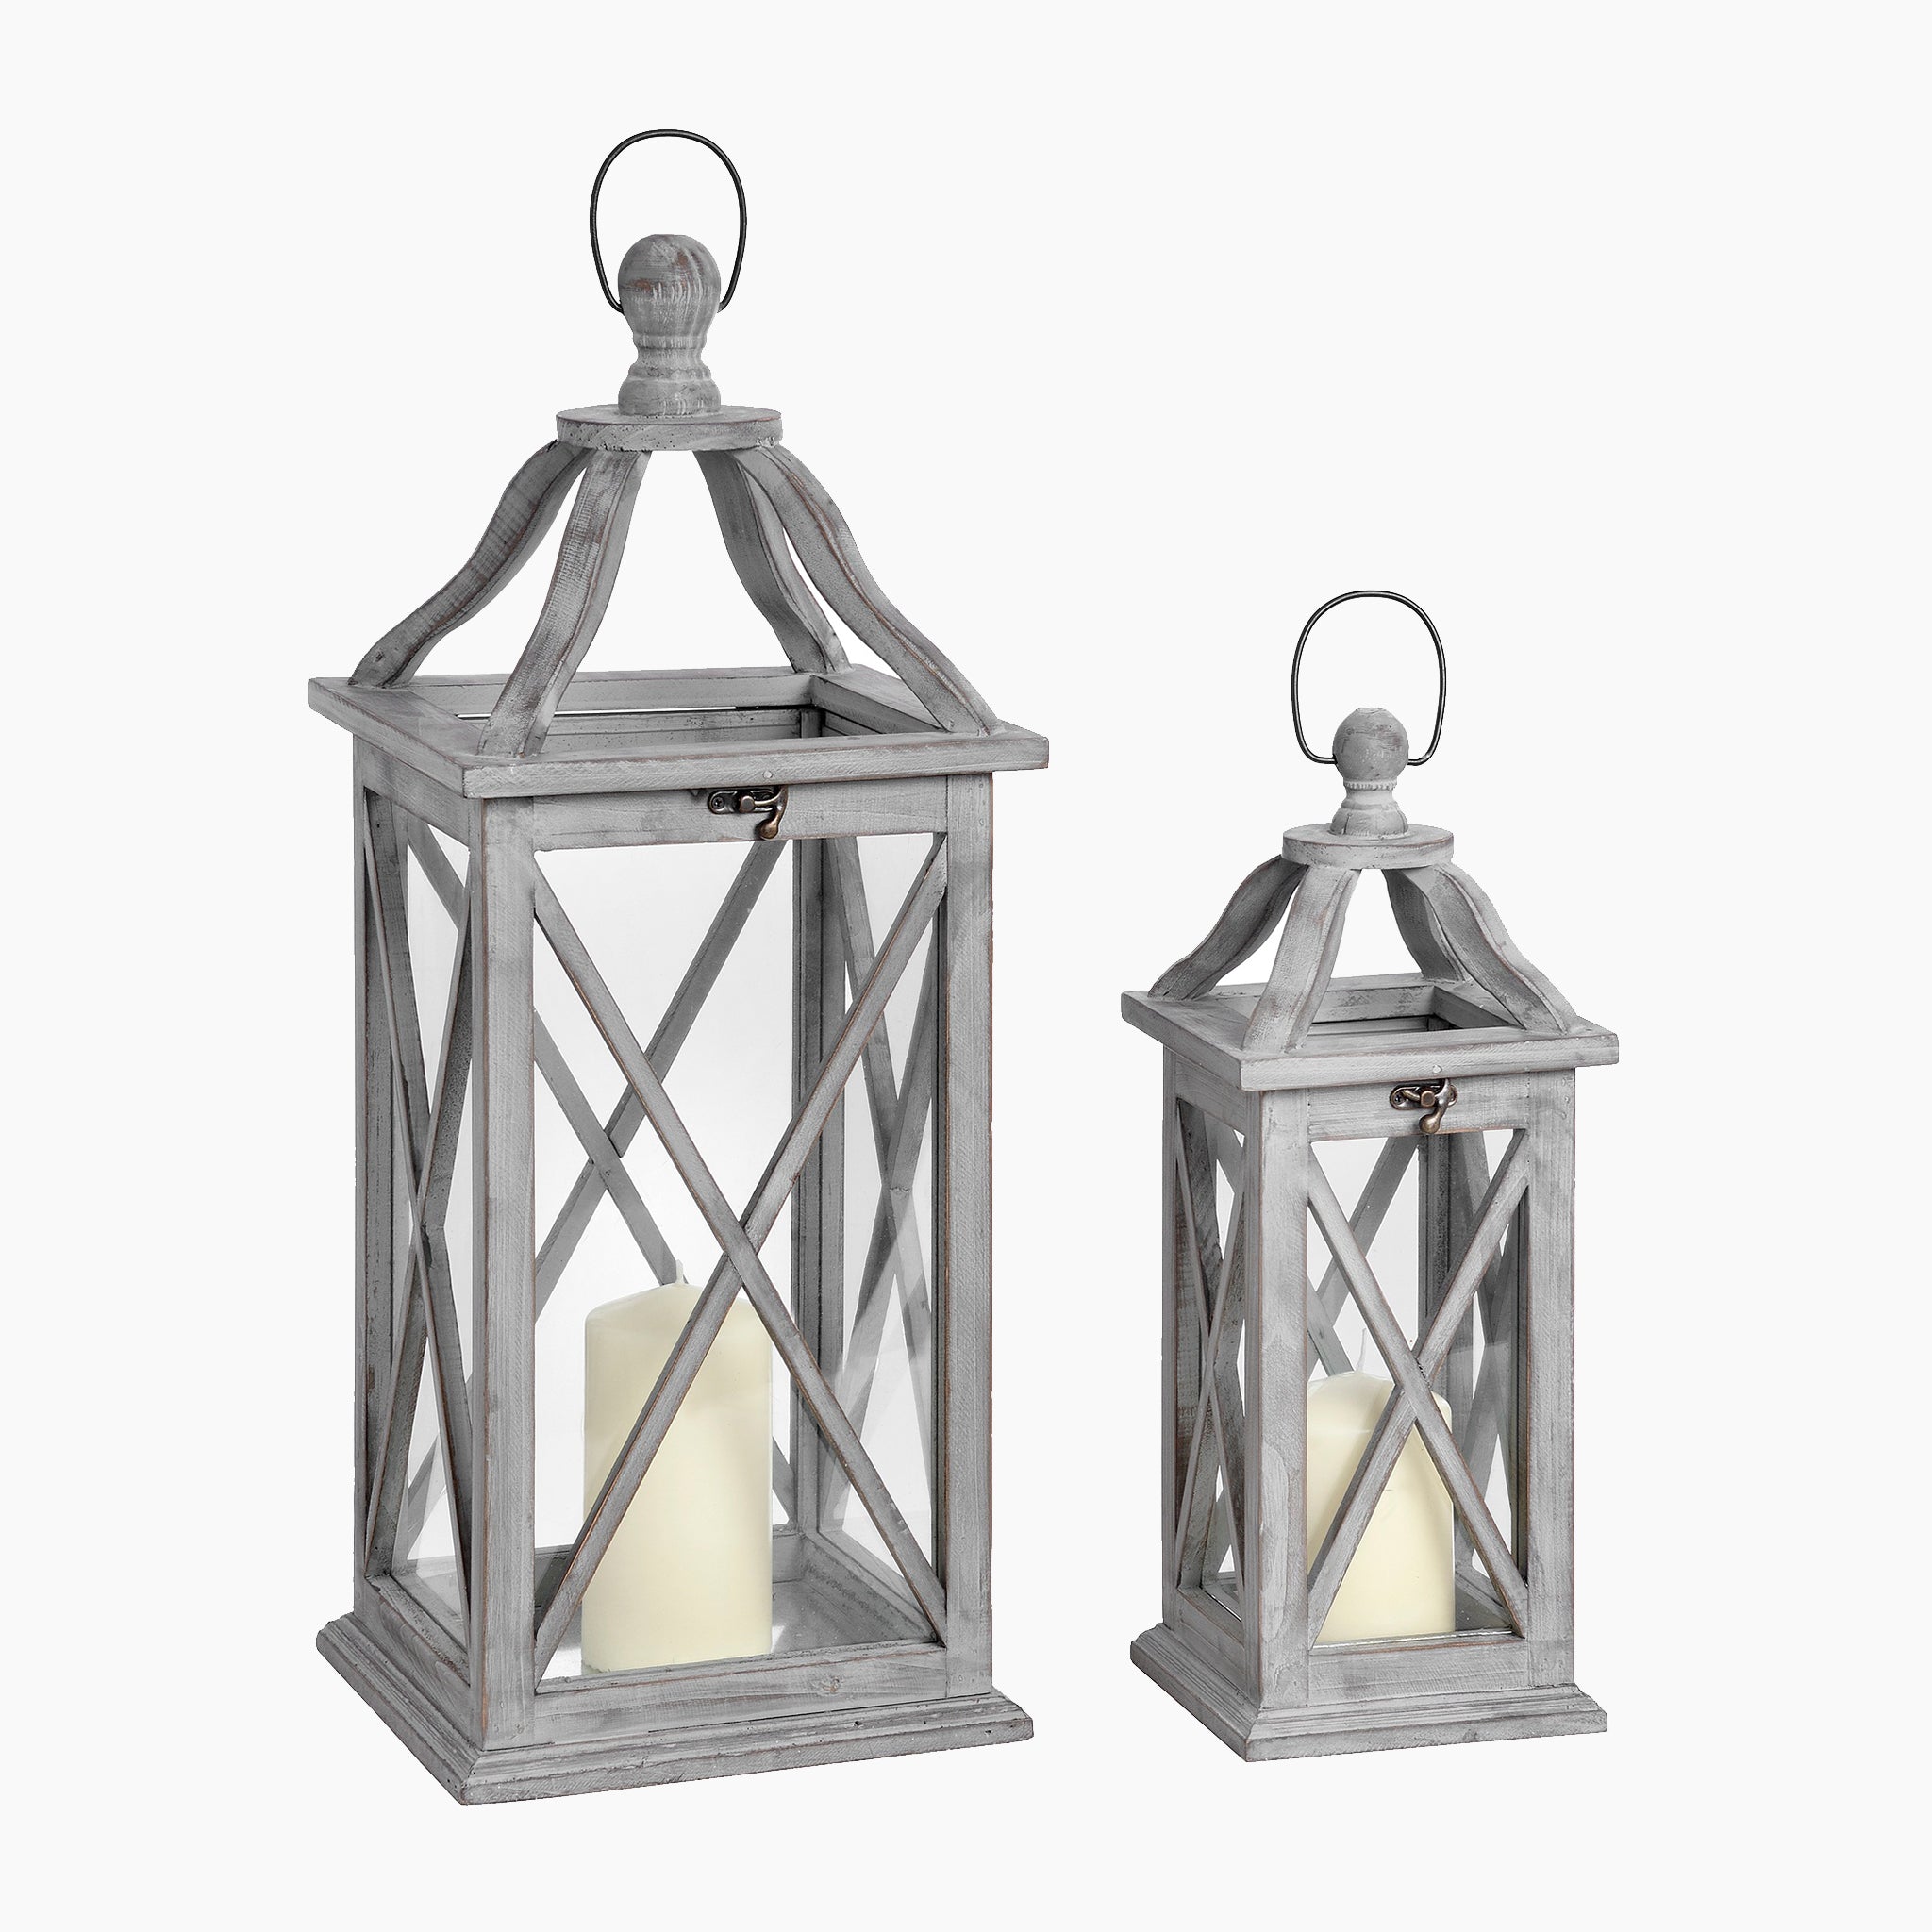 Set Of Two Grey Cross Section Lanterns With Open Tops